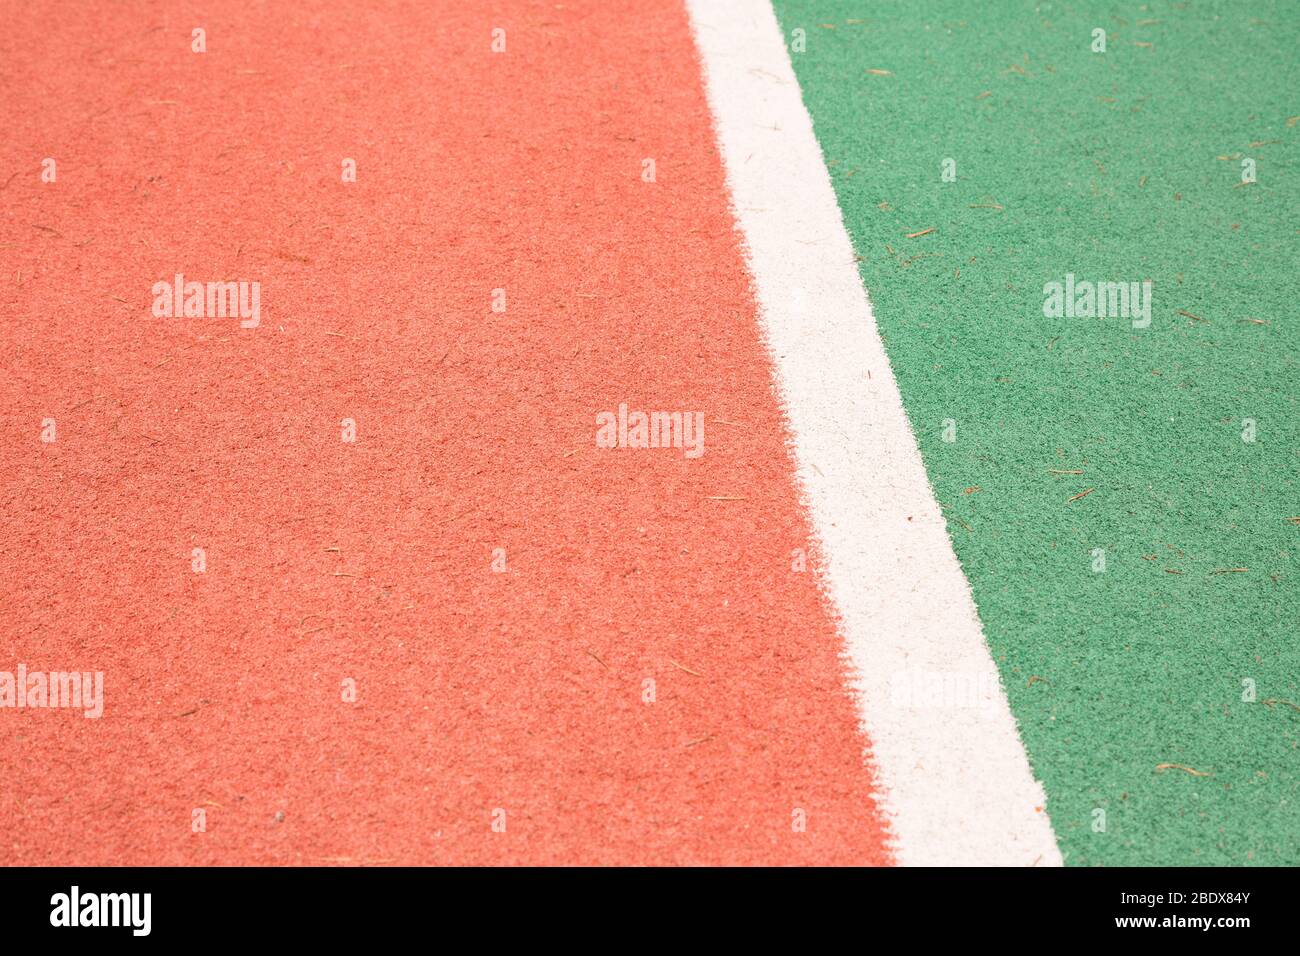 Coloured AstroTurf at Kent school games Stock Photo